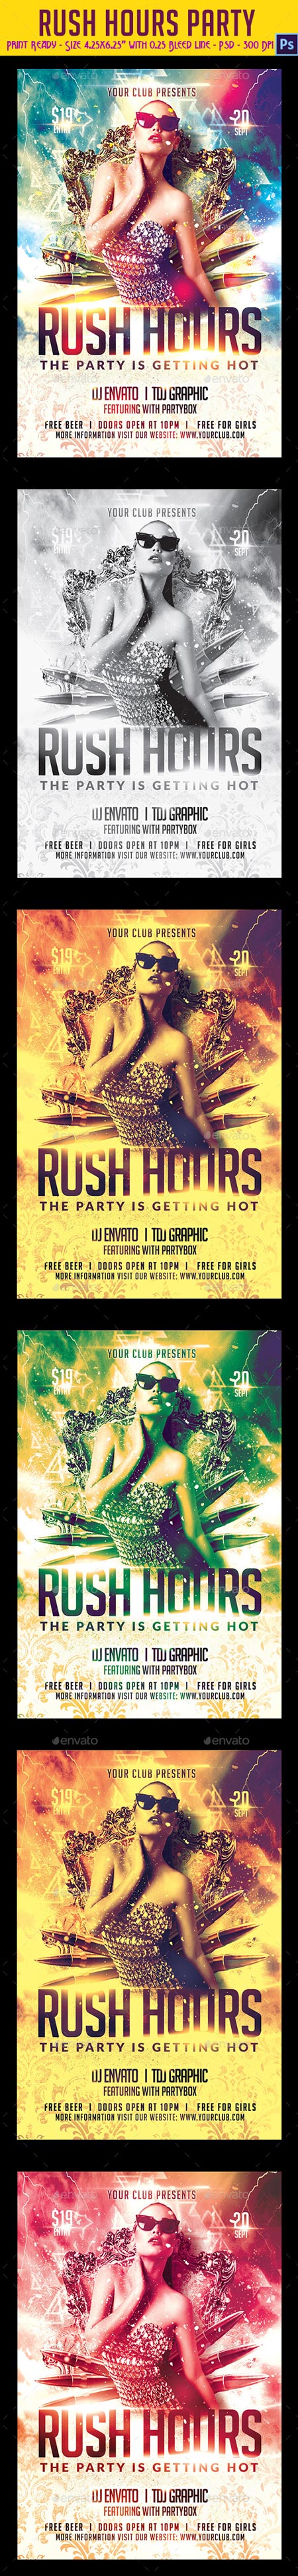 Rush Hours Party Flyer 9025058